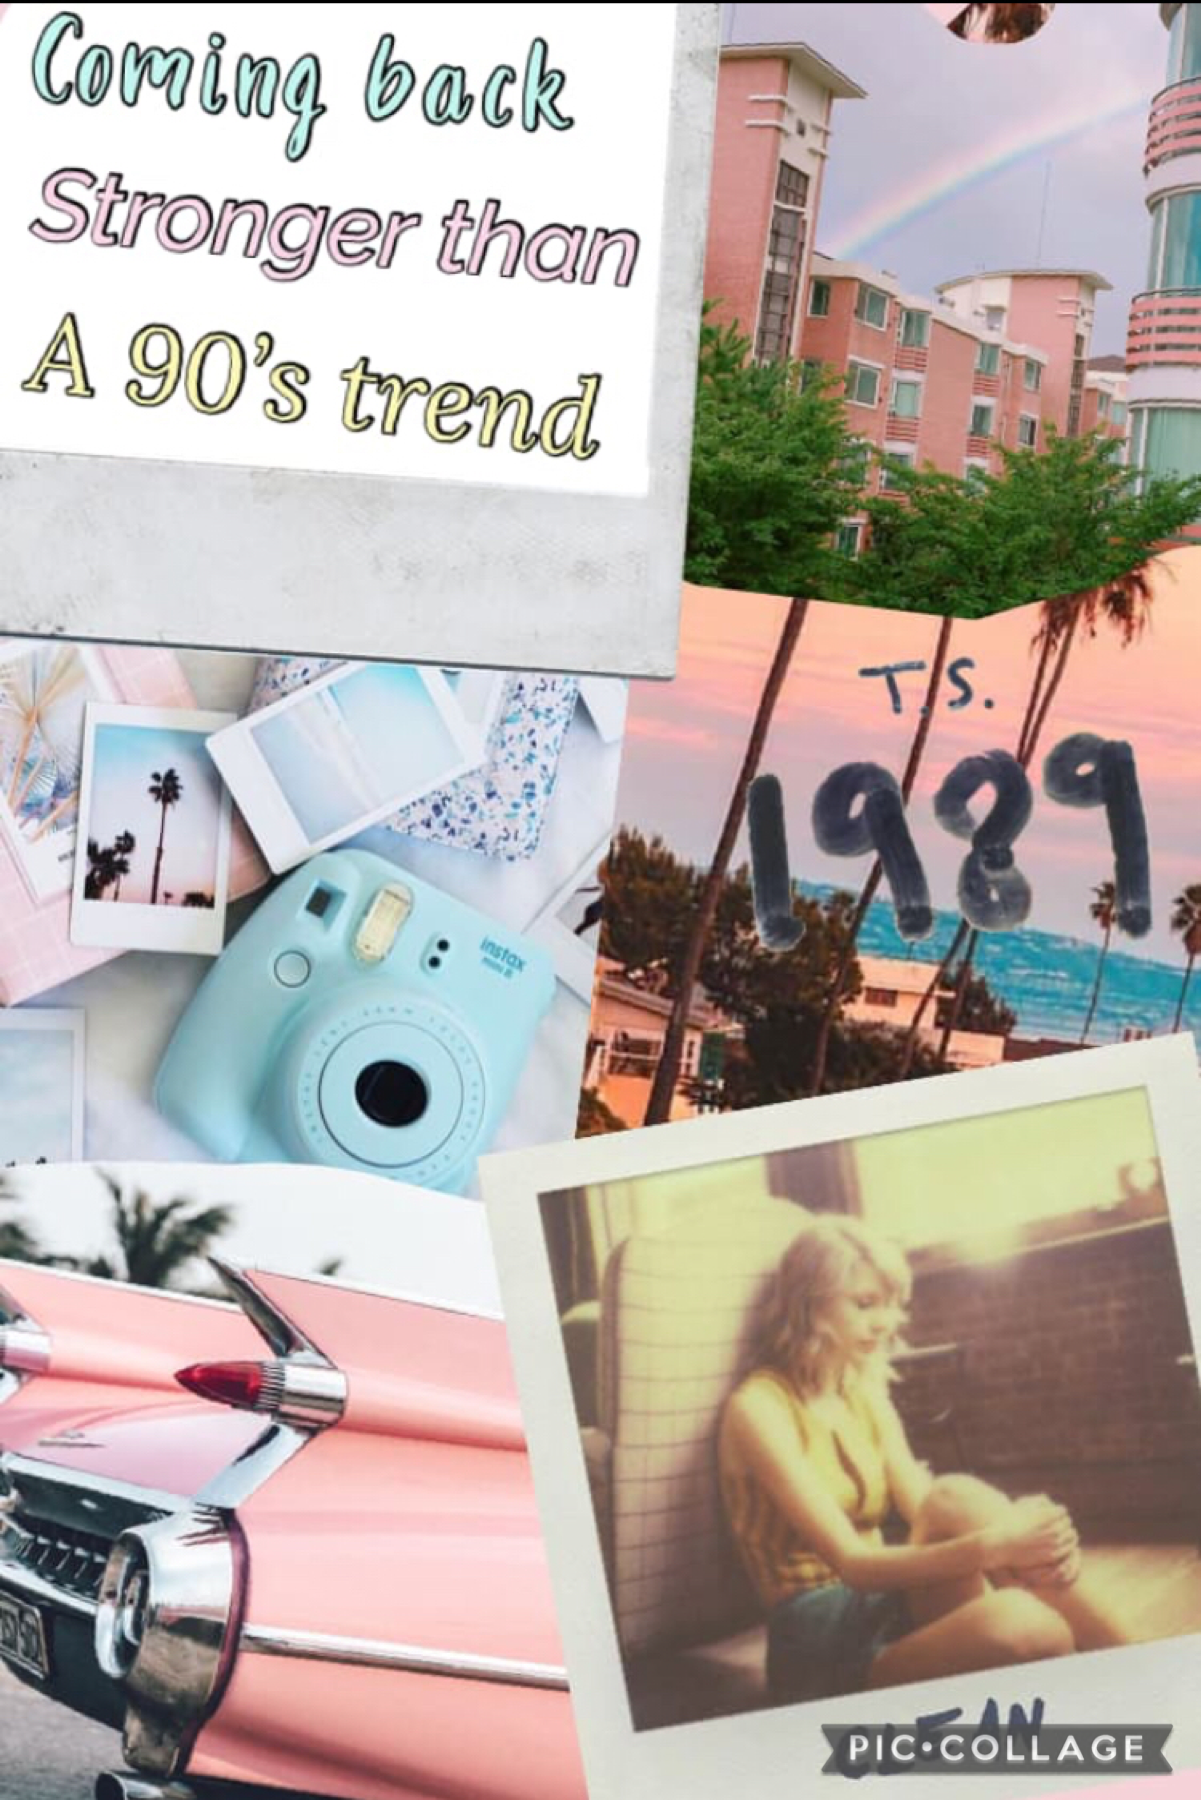 Retro aesthetic 27.7.21 and entry for Cxlesticals contest 